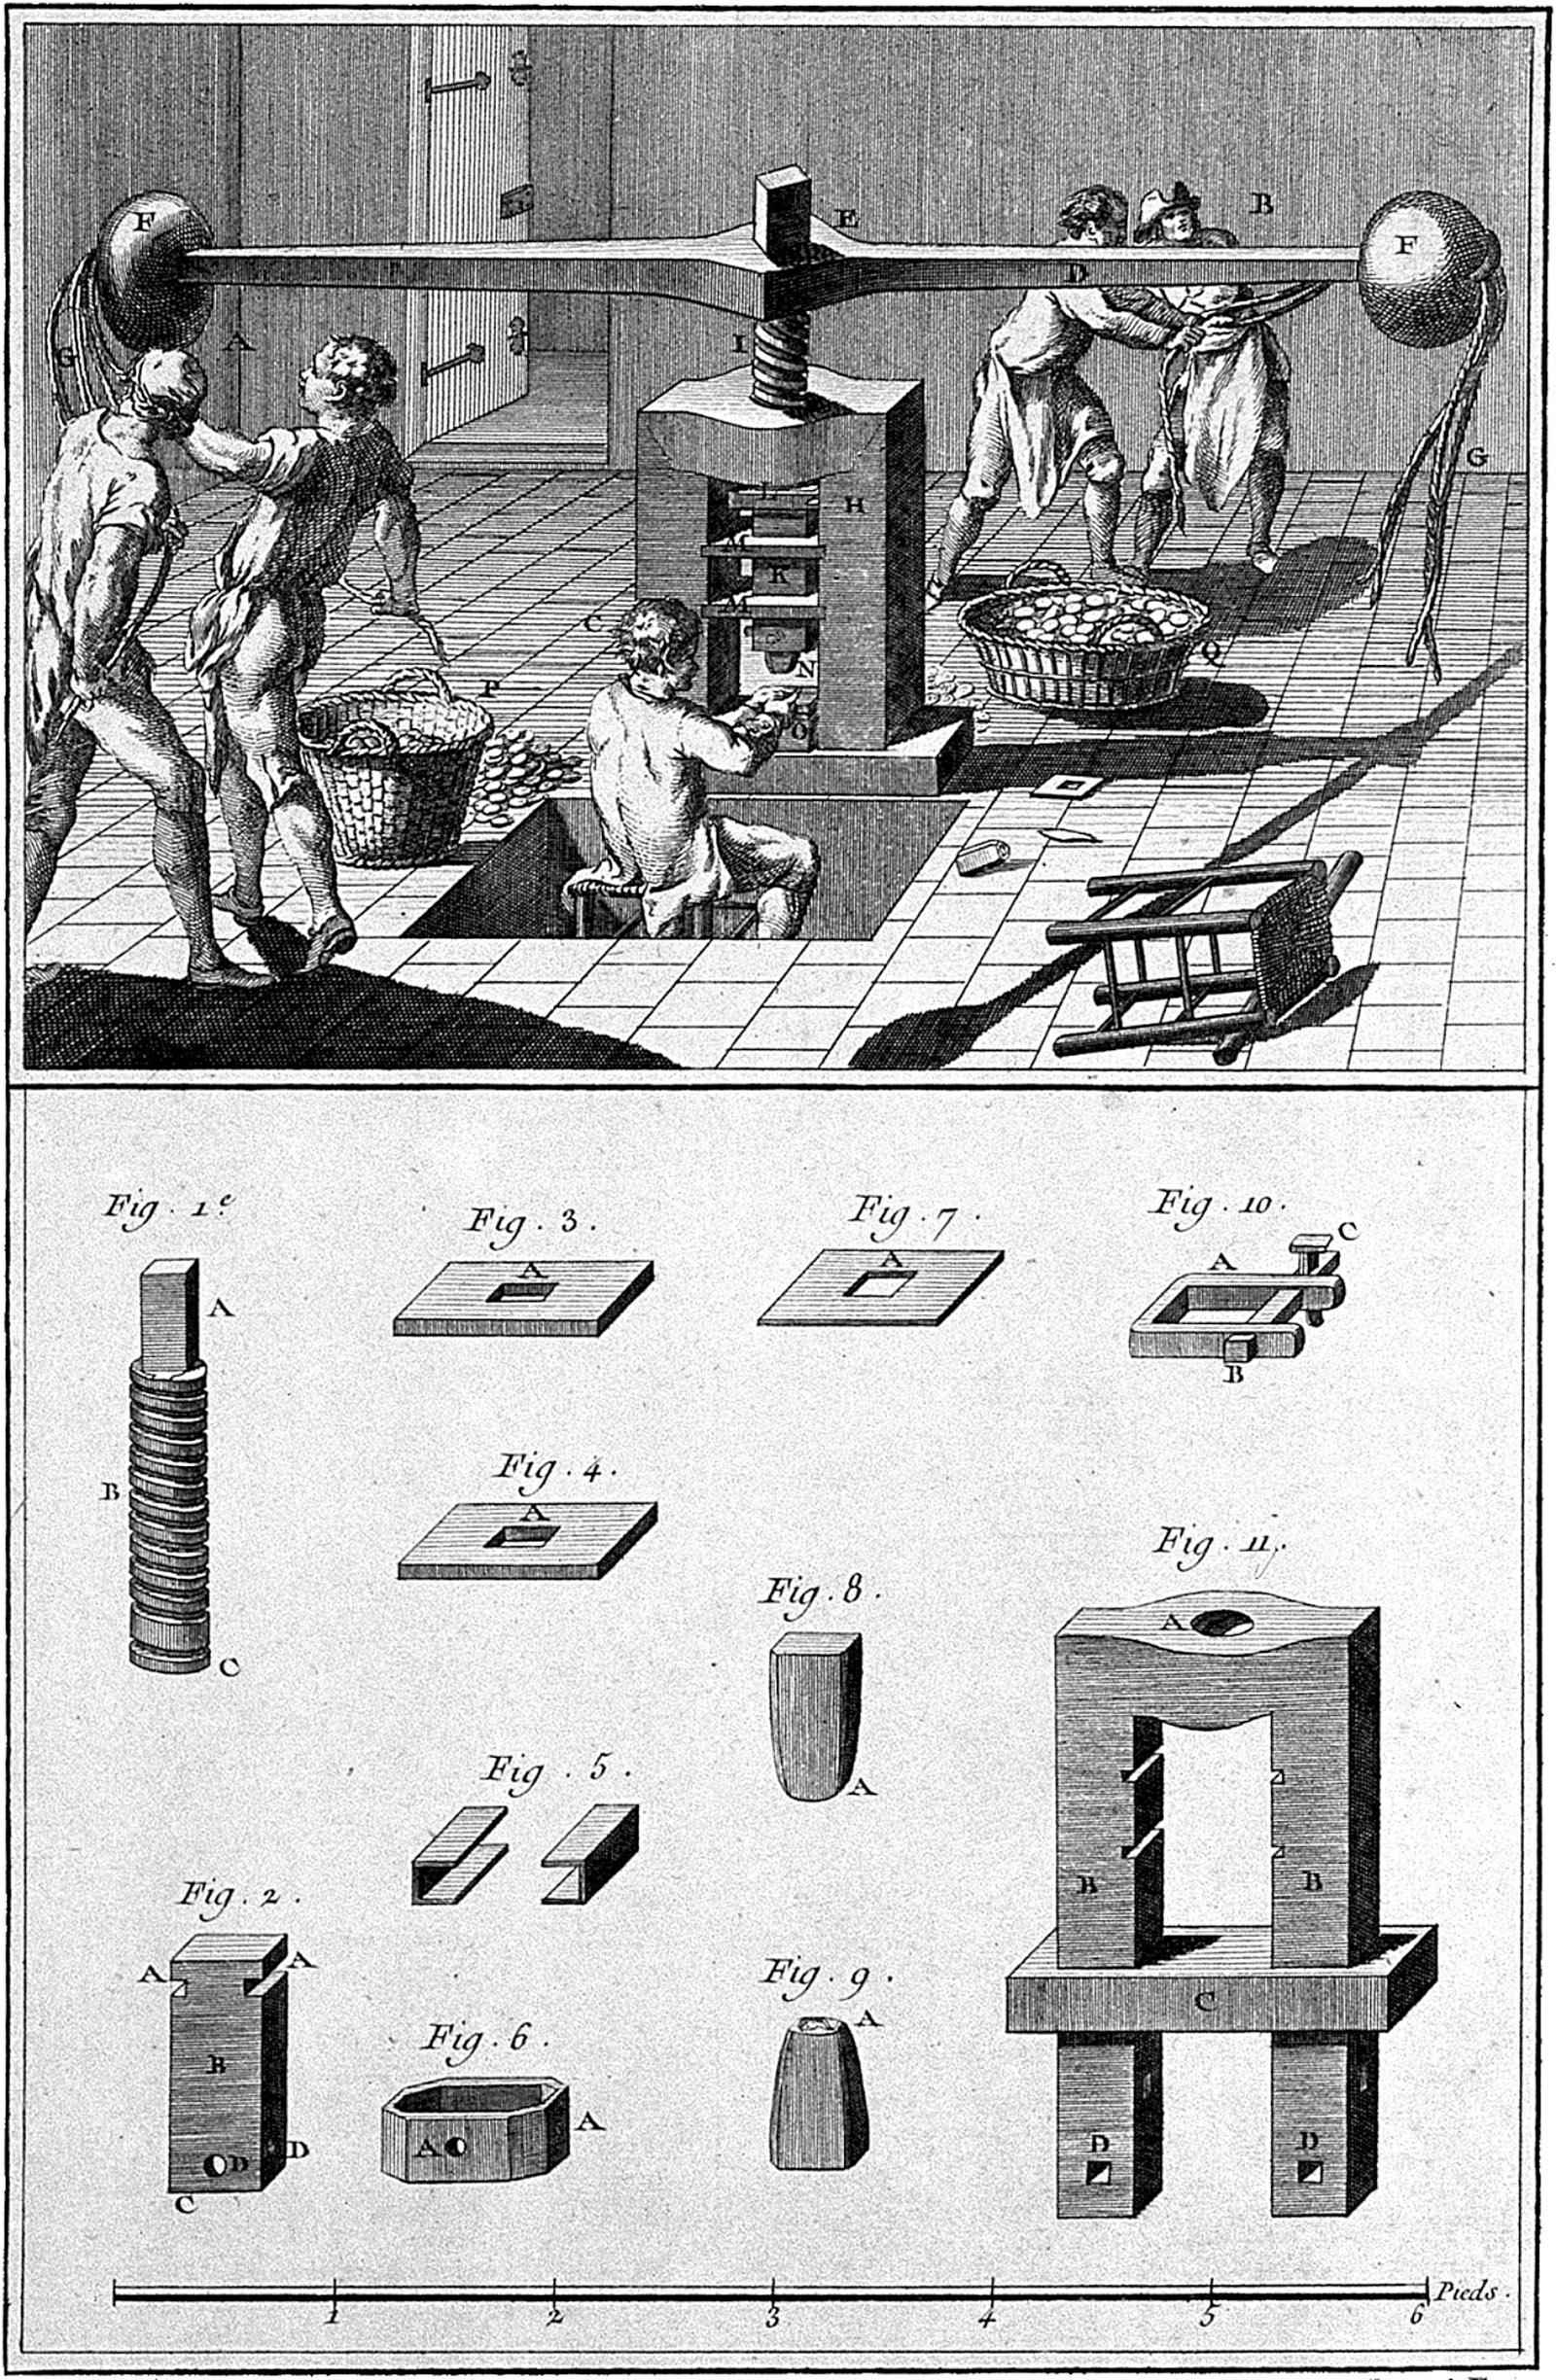 Interior view and components of a coin press; etching from Diderot’s Encyclopedia